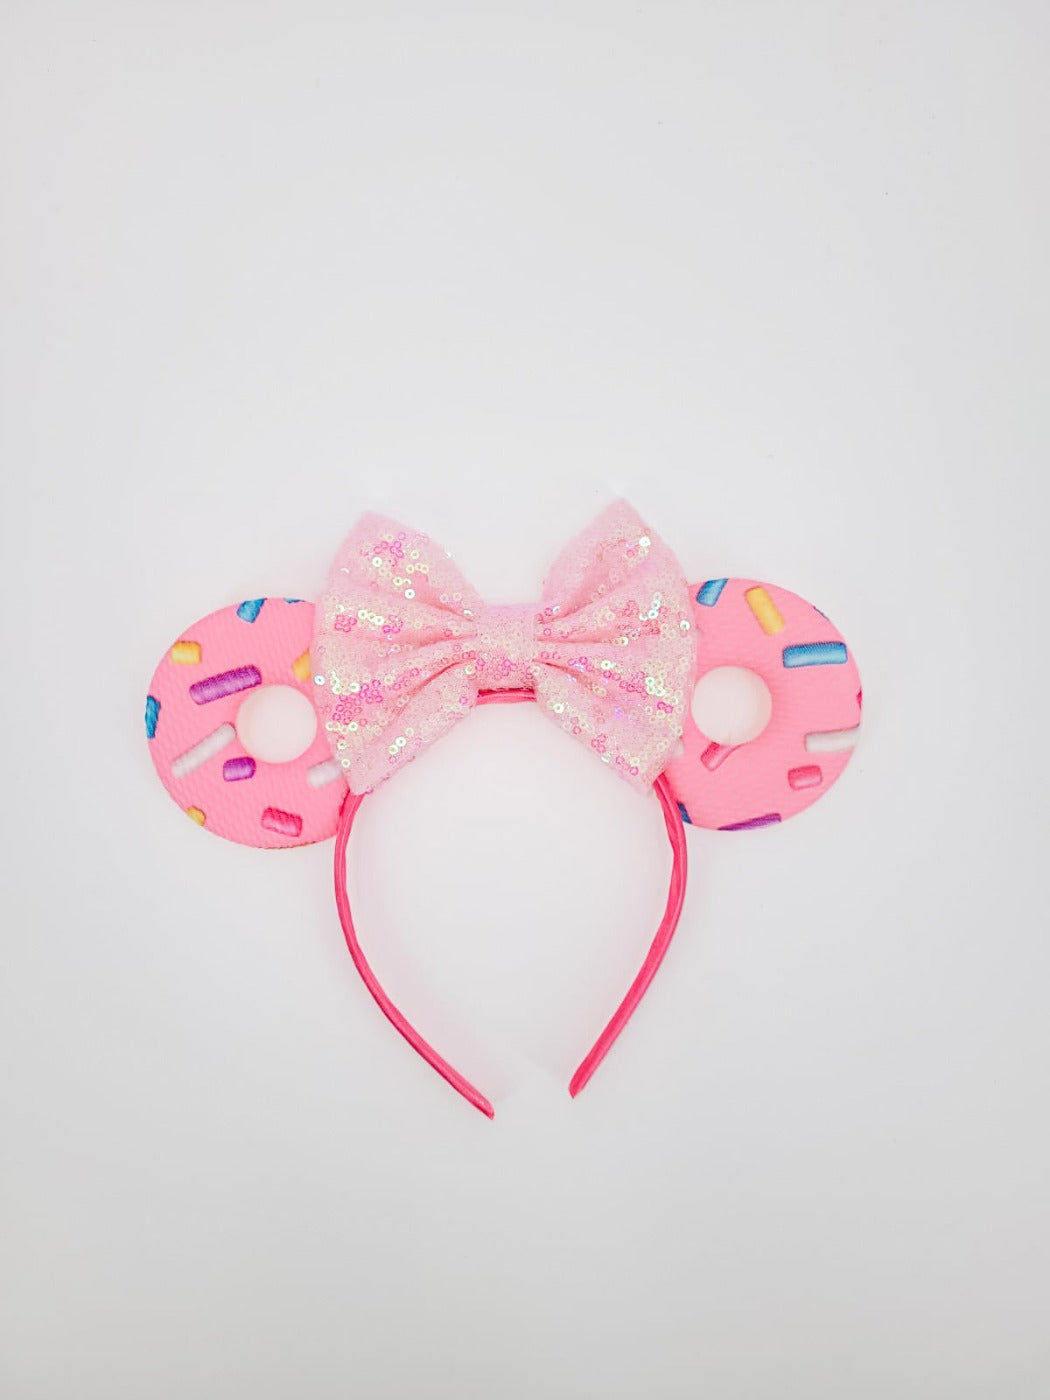 Donut Themed Ear Headband with Pink Sequined Bow